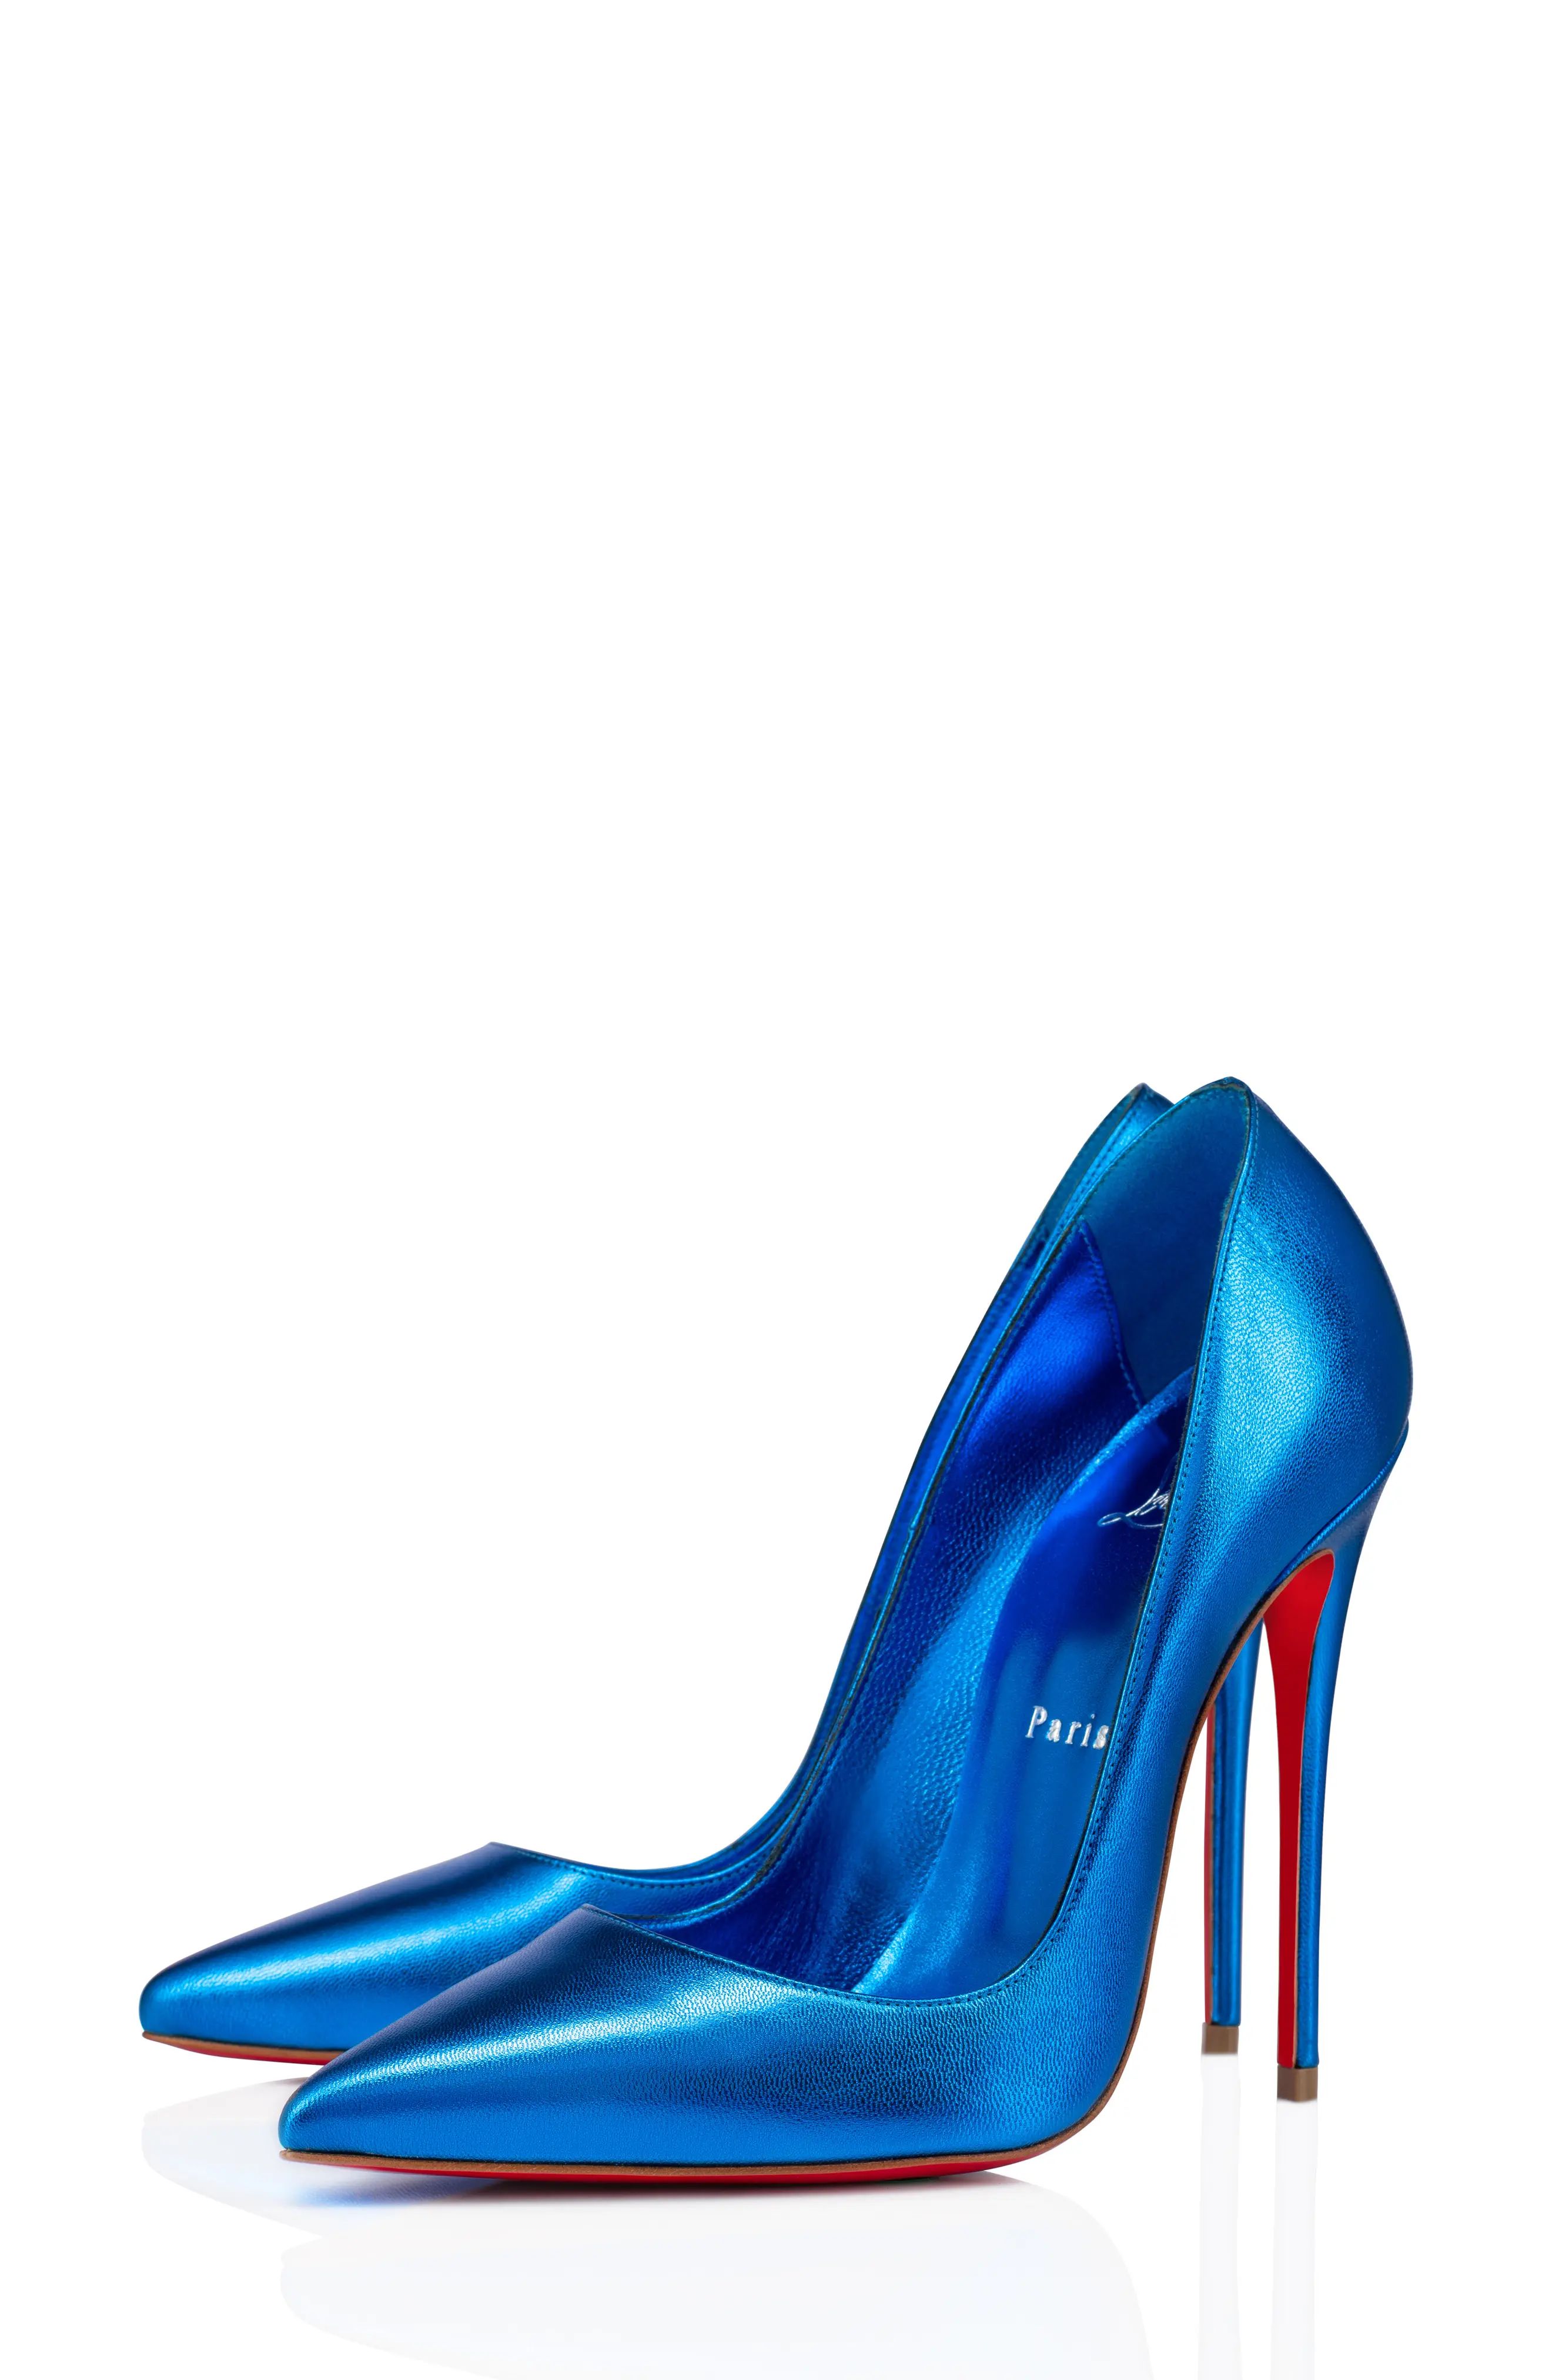 Christian Louboutin So Kate Pointed Toe Pump in Alize at Nordstrom, Size 5Us | Nordstrom